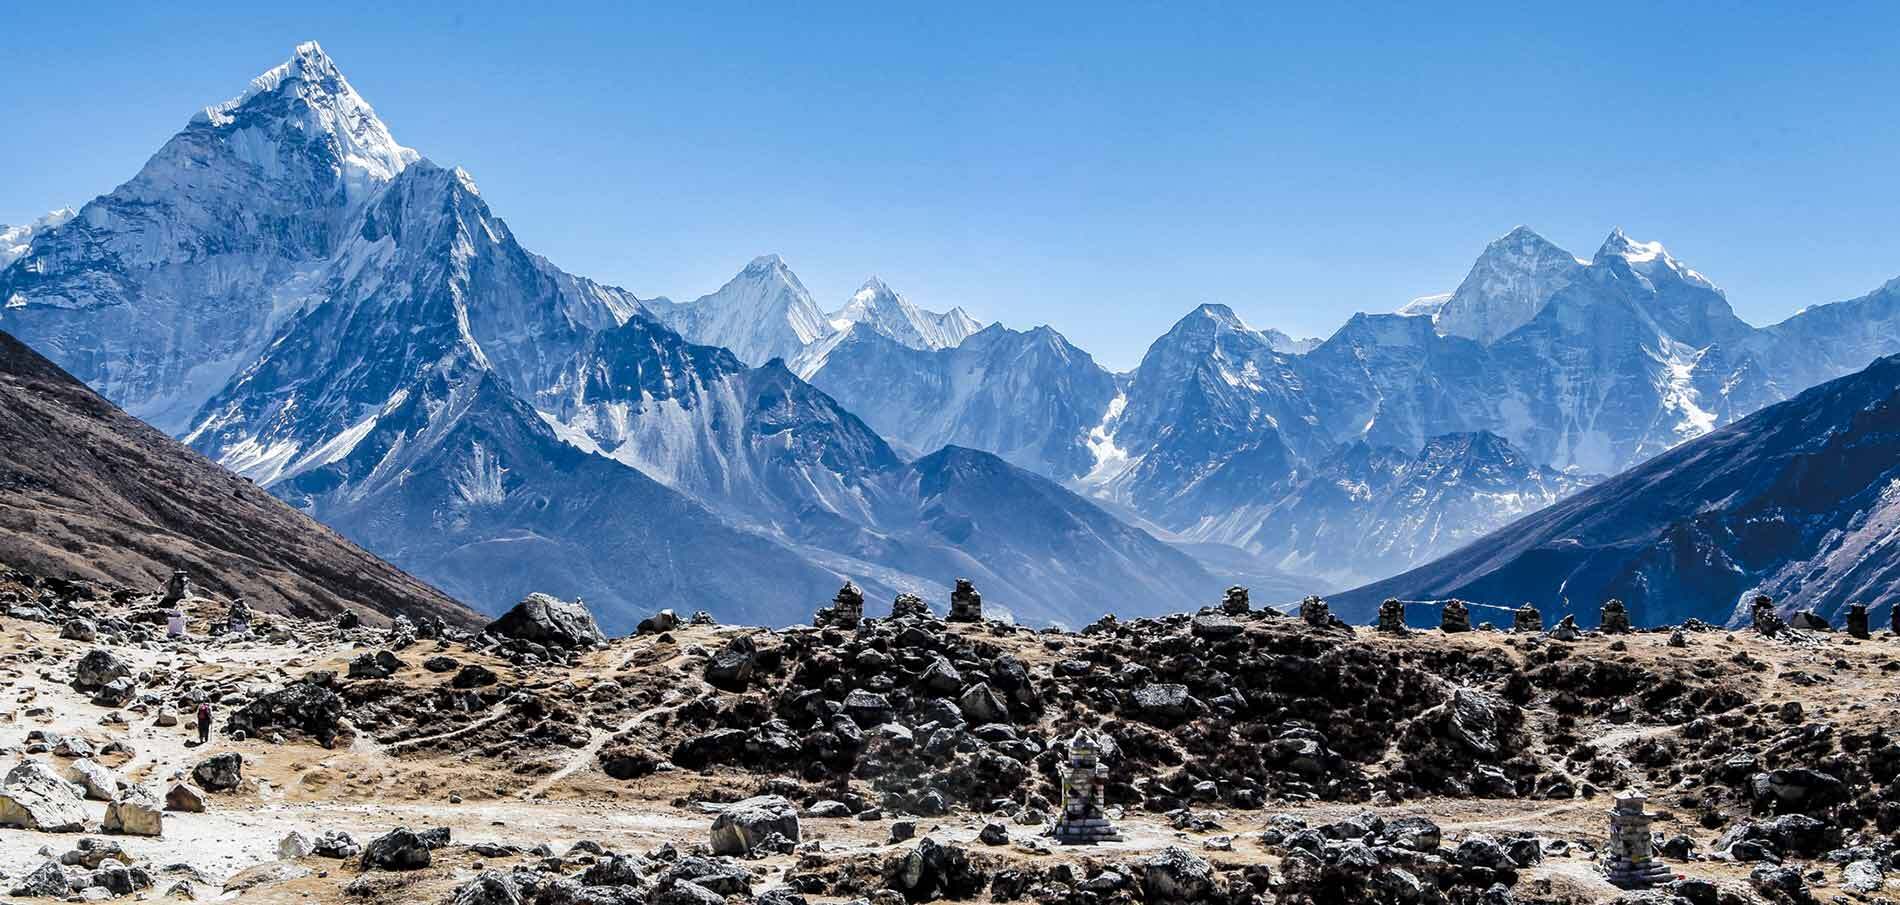 When is the Best Time for the Everest Three High Passes Trek?